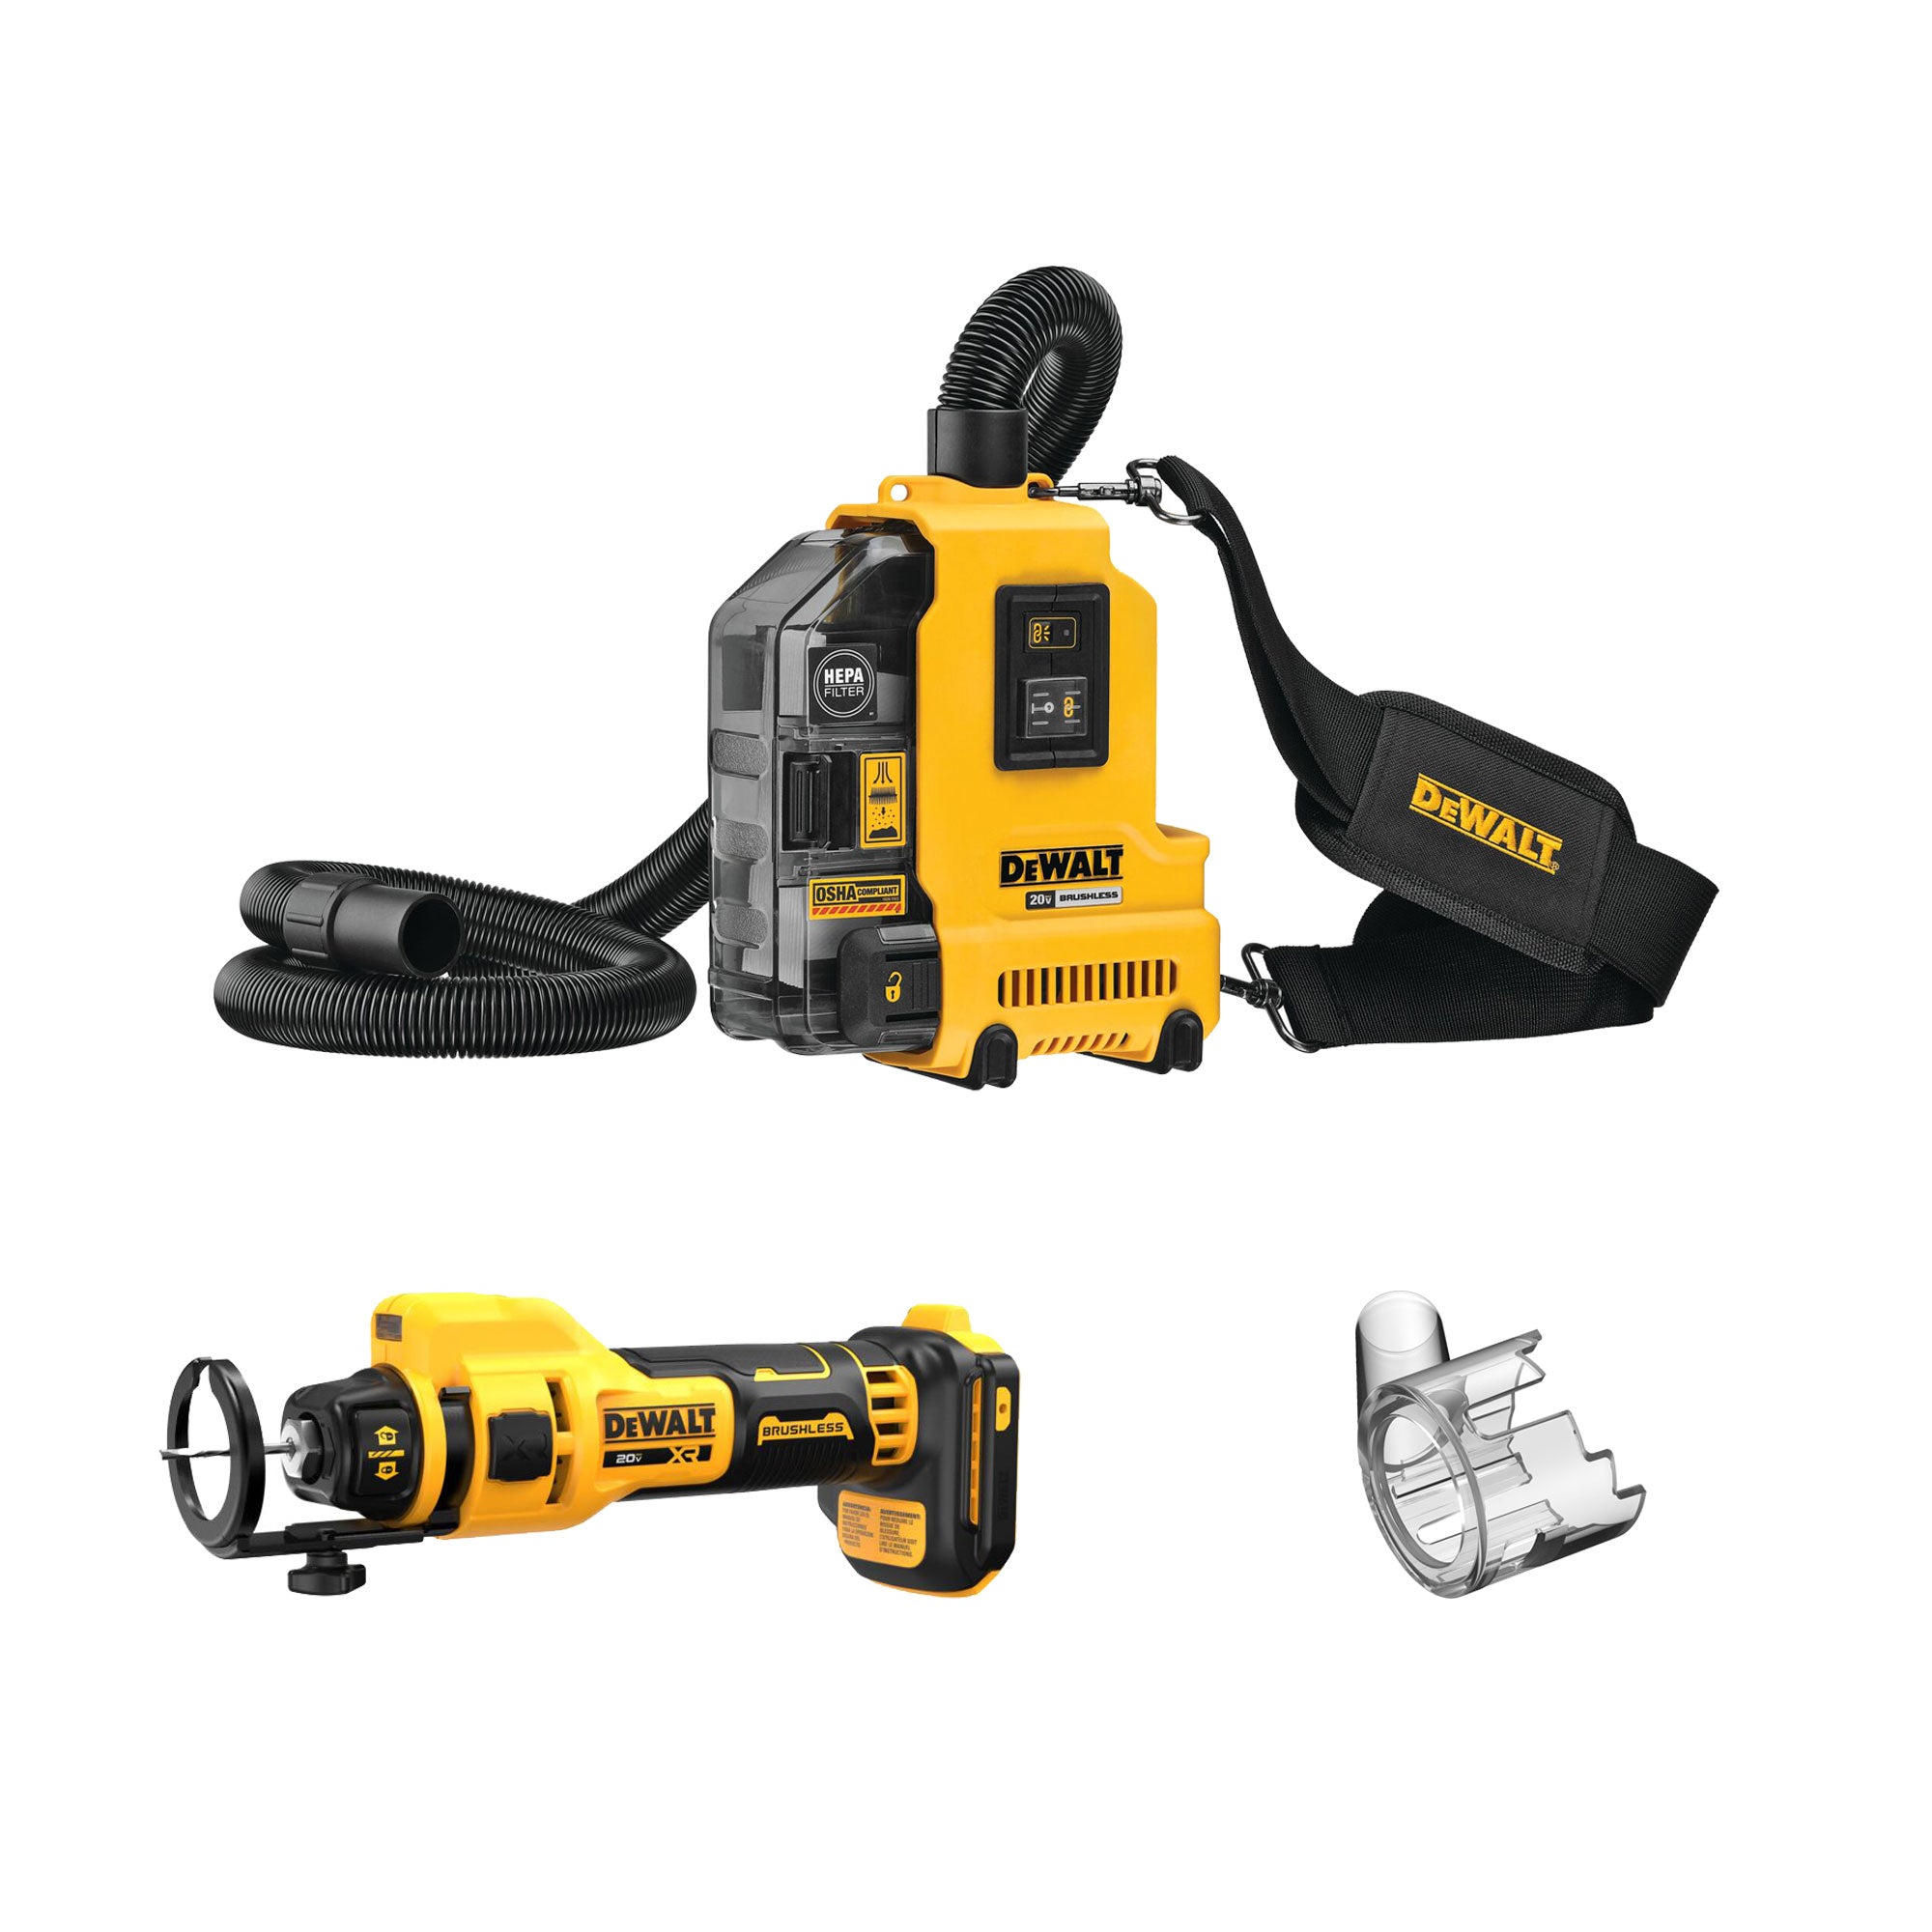 DEWALT DCE555B with DCE555DC & DWH161B 20V MAX Lithium-Ion Brushless Cordless Drywall Starter Kit with Drywall Cut-Out Tool, Dust Shroud Attachment, and 20V MAX Brushless Universal Dust Extractor